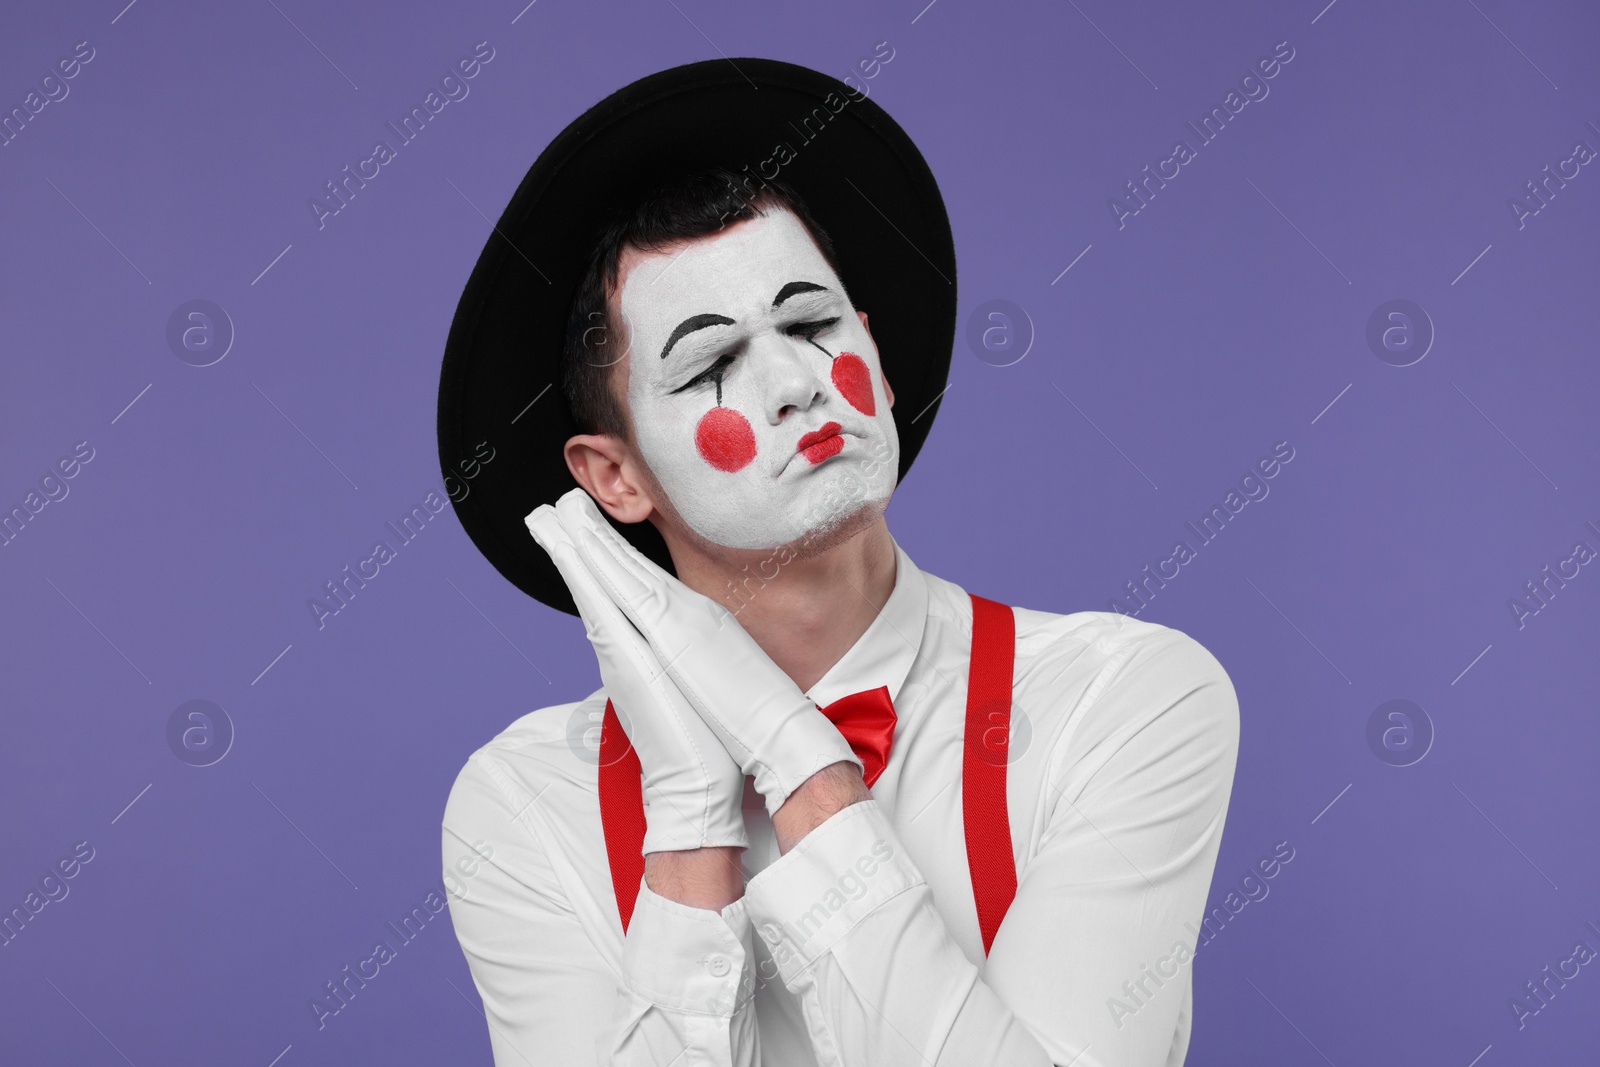 Photo of Mime artist in hat posing on purple background